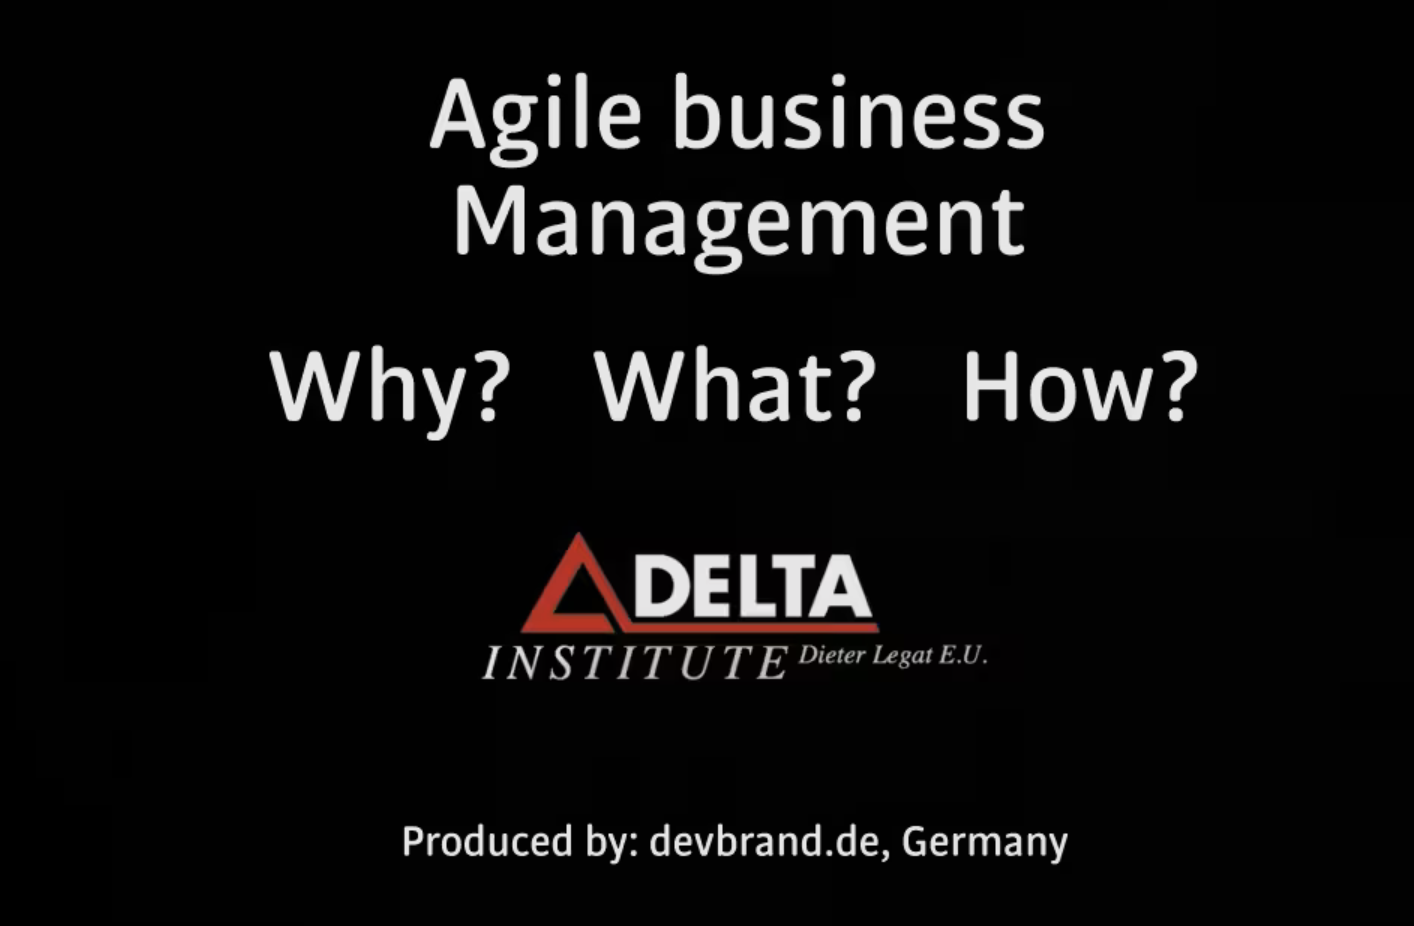 Video: Agile business management - Why? What? How?